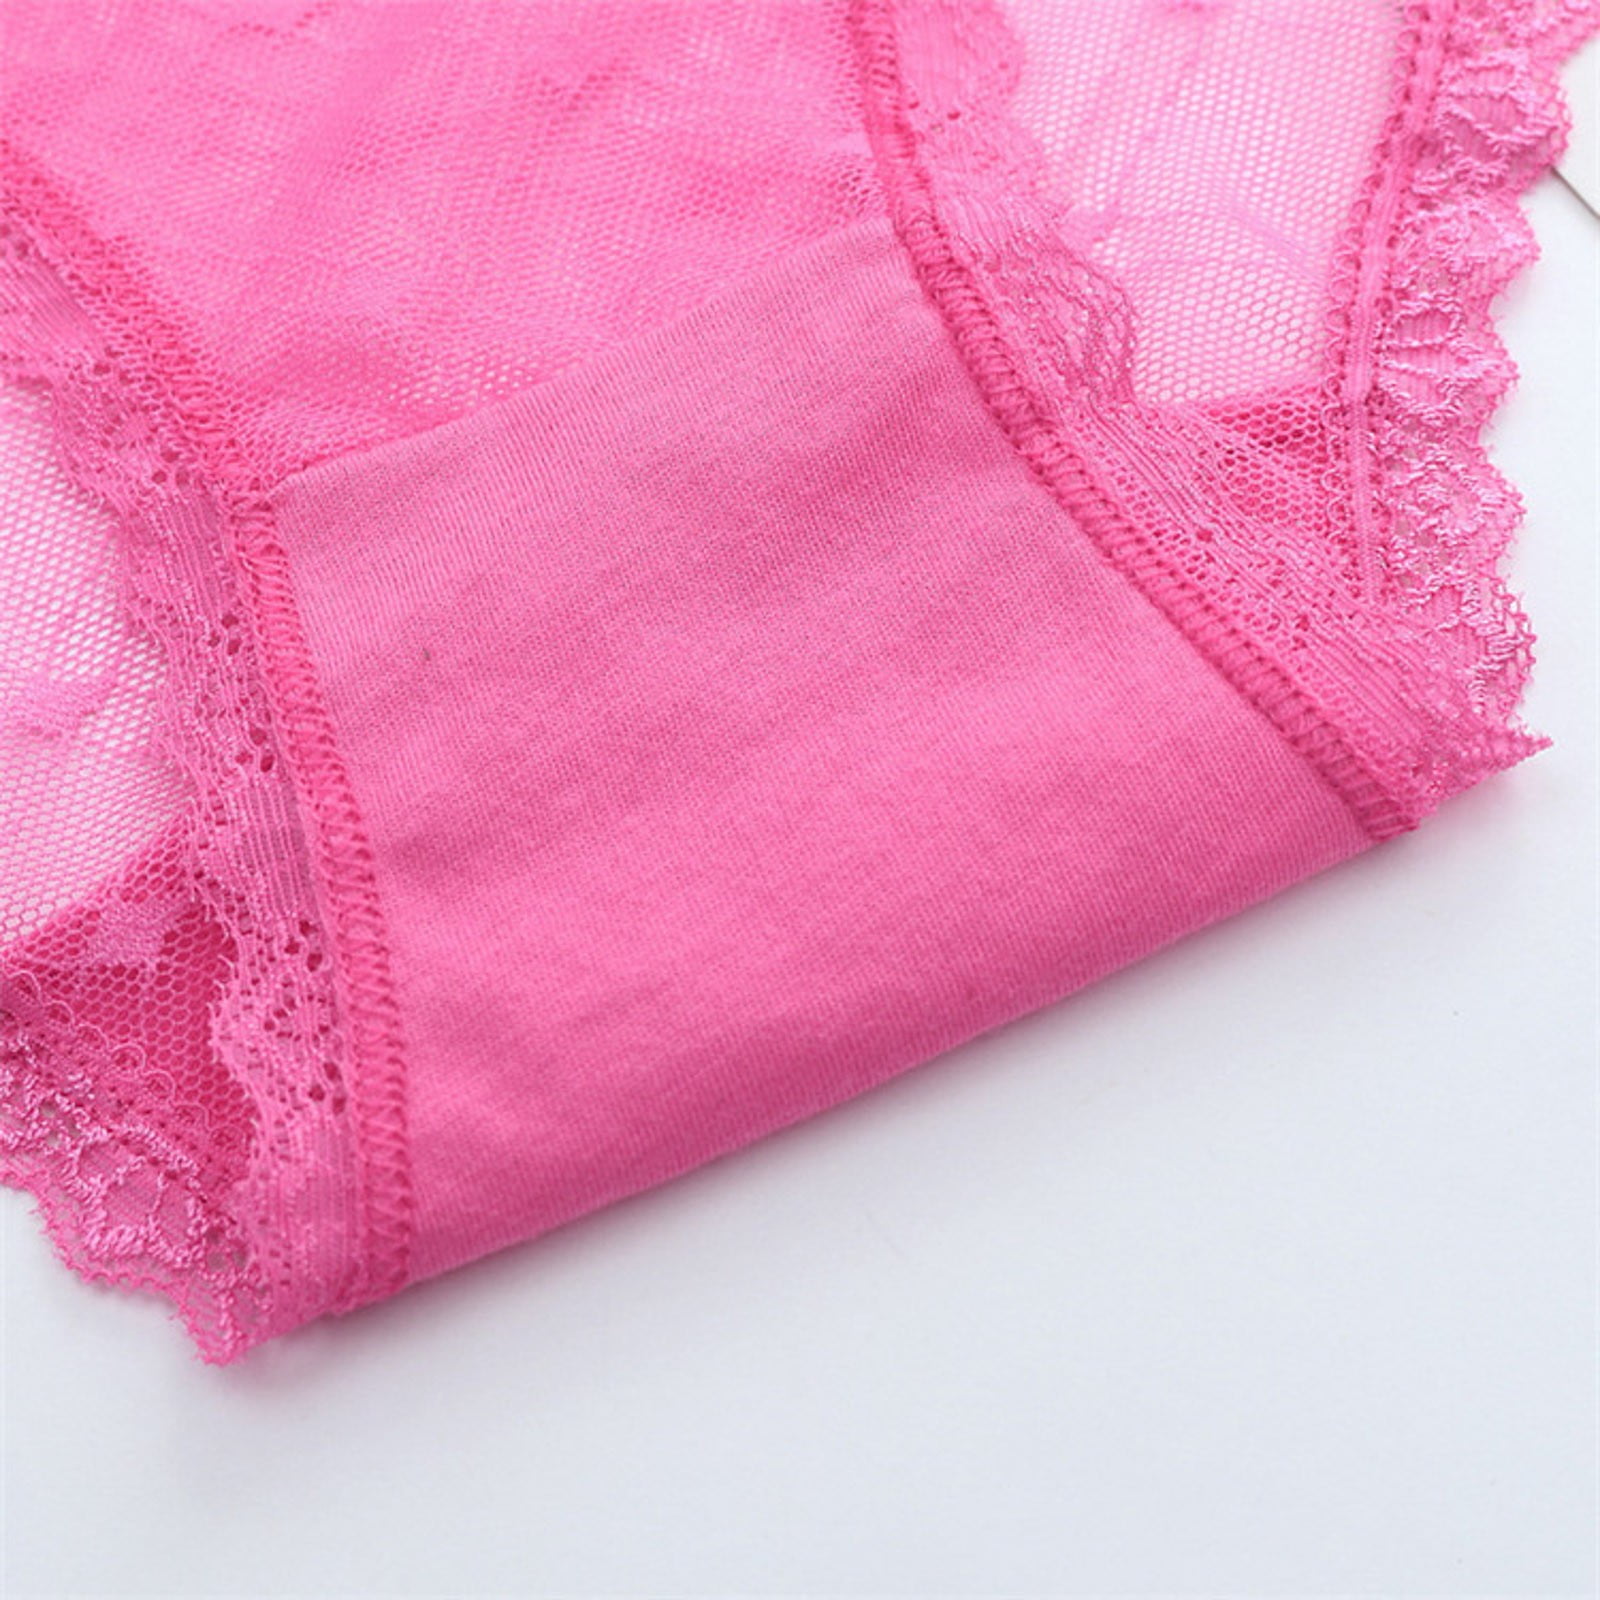 nsendm Womens Sheer Lace Panties See Through Mesh Cotton Crotch Seamless  Briefs Bladder Leak Underwear for Women Underpants Hot Pink Large